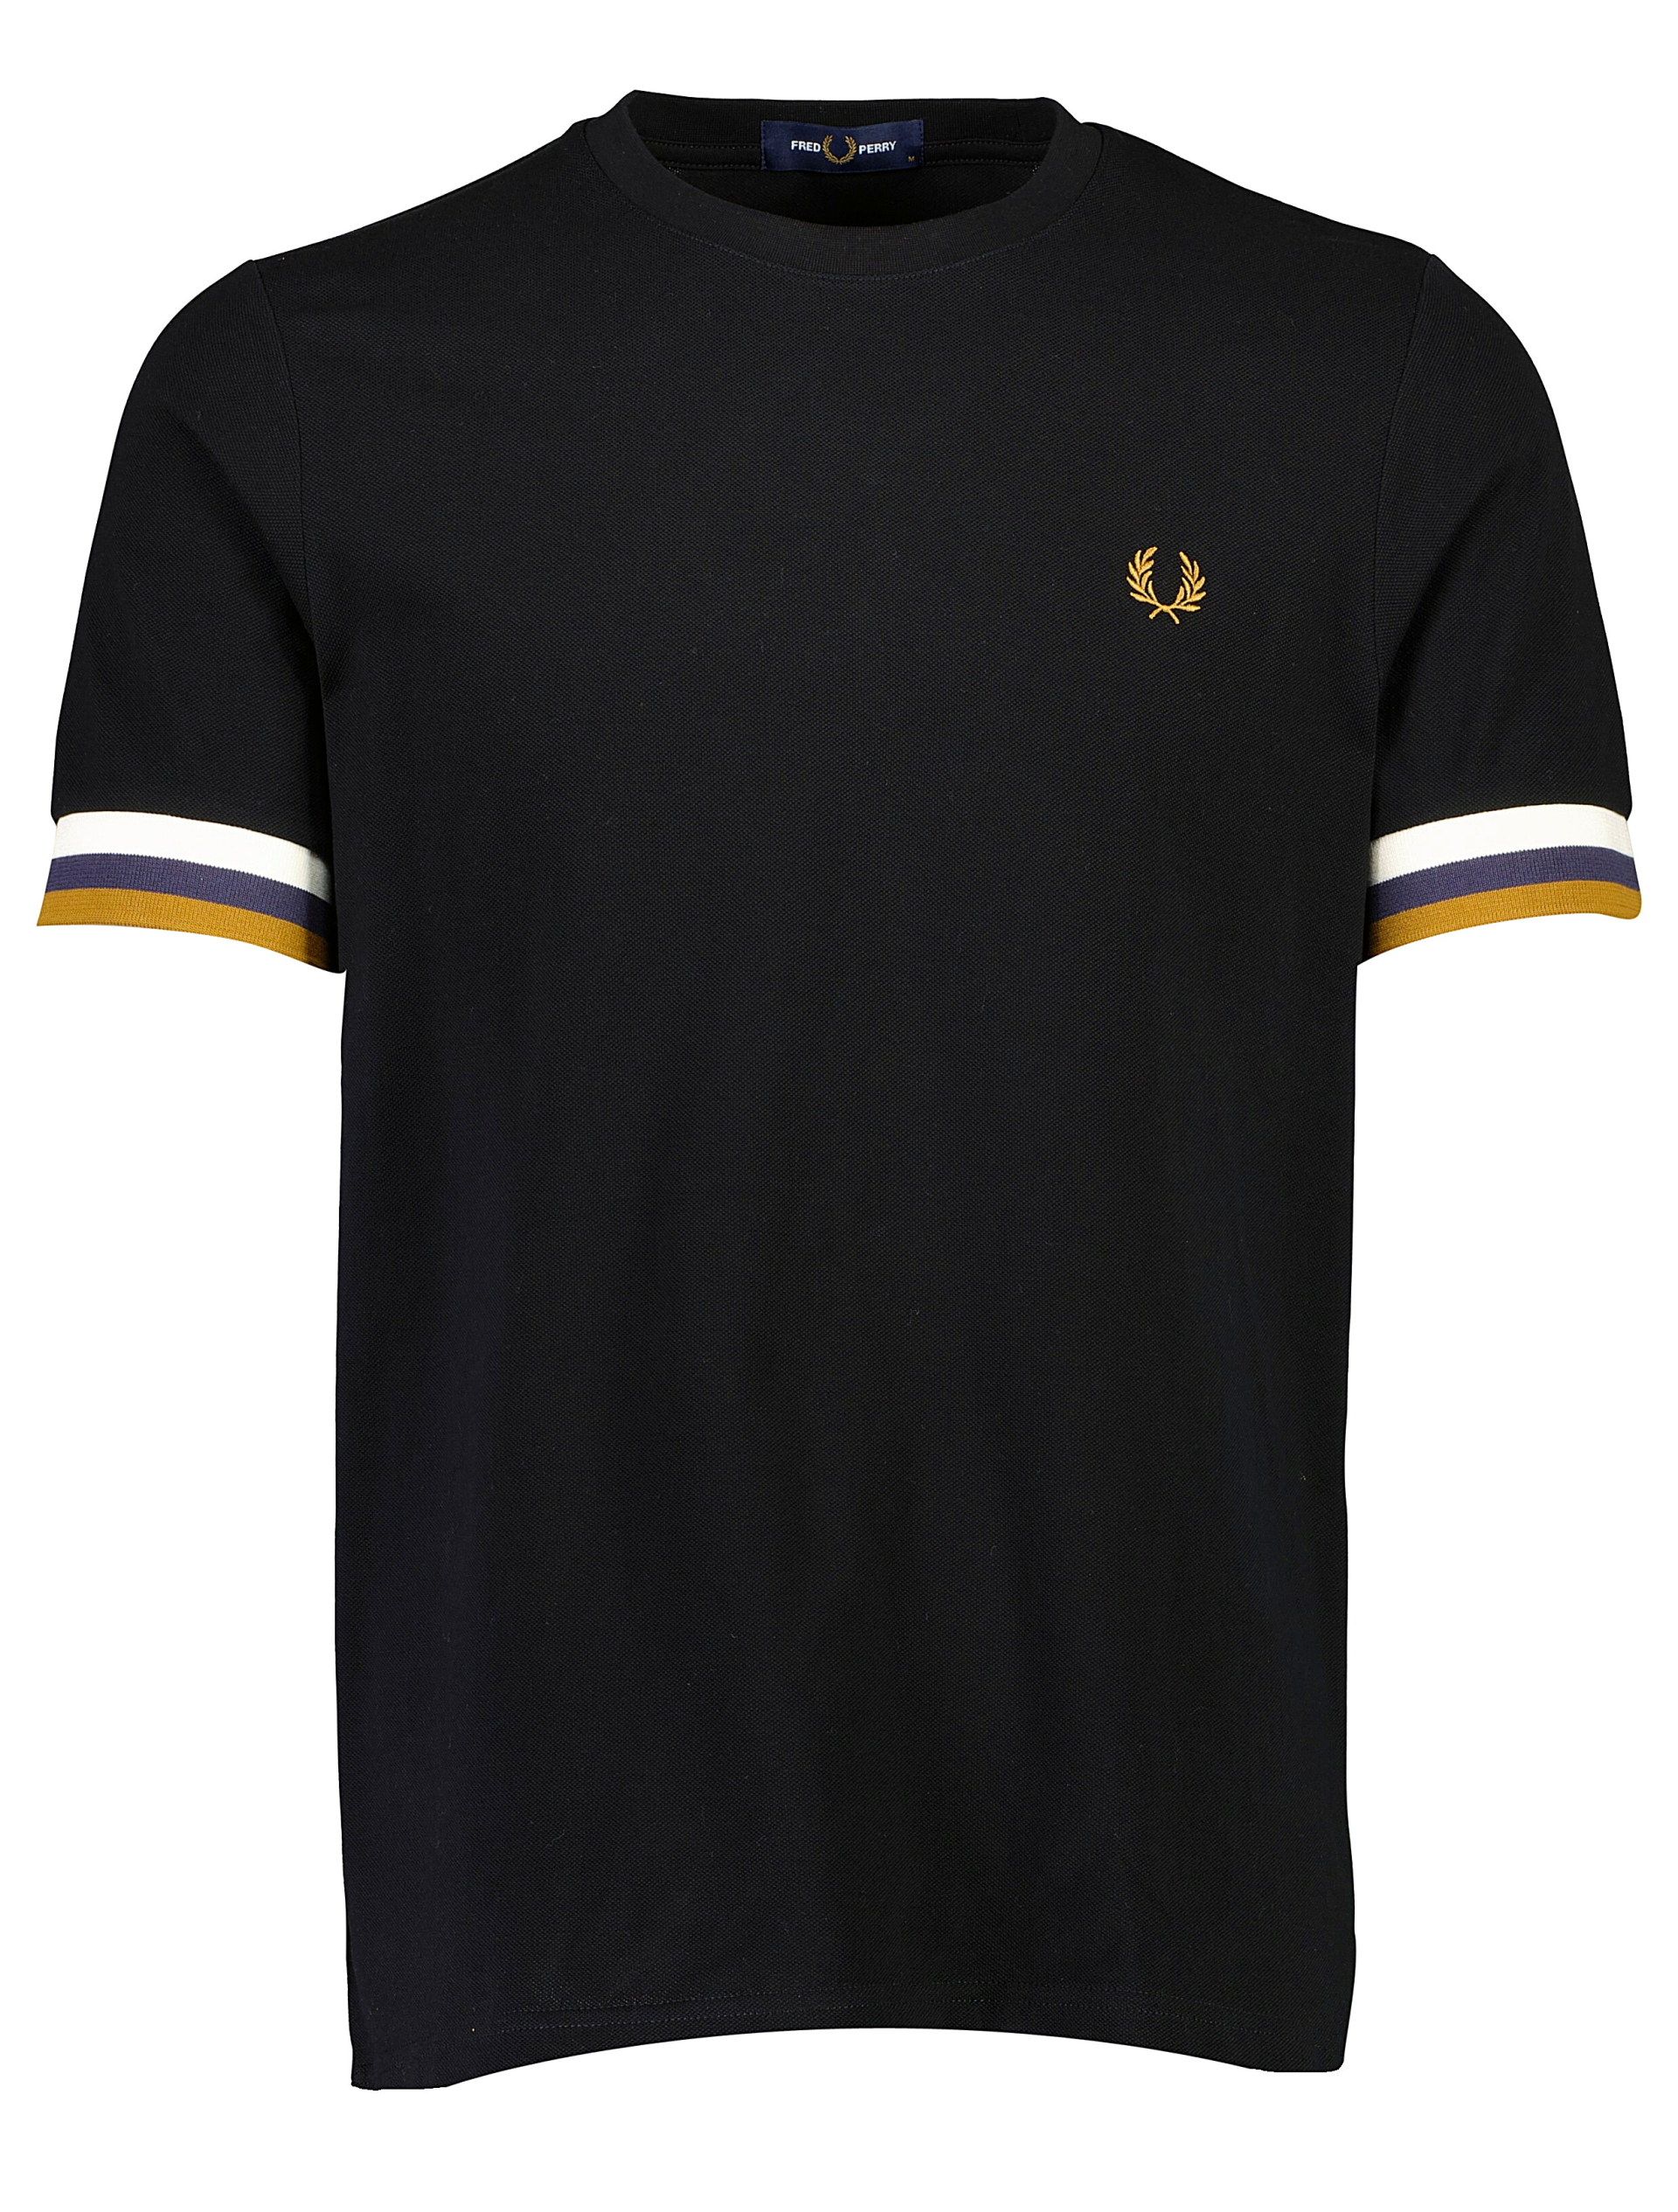 Fred Perry T-shirt sort / 102 black